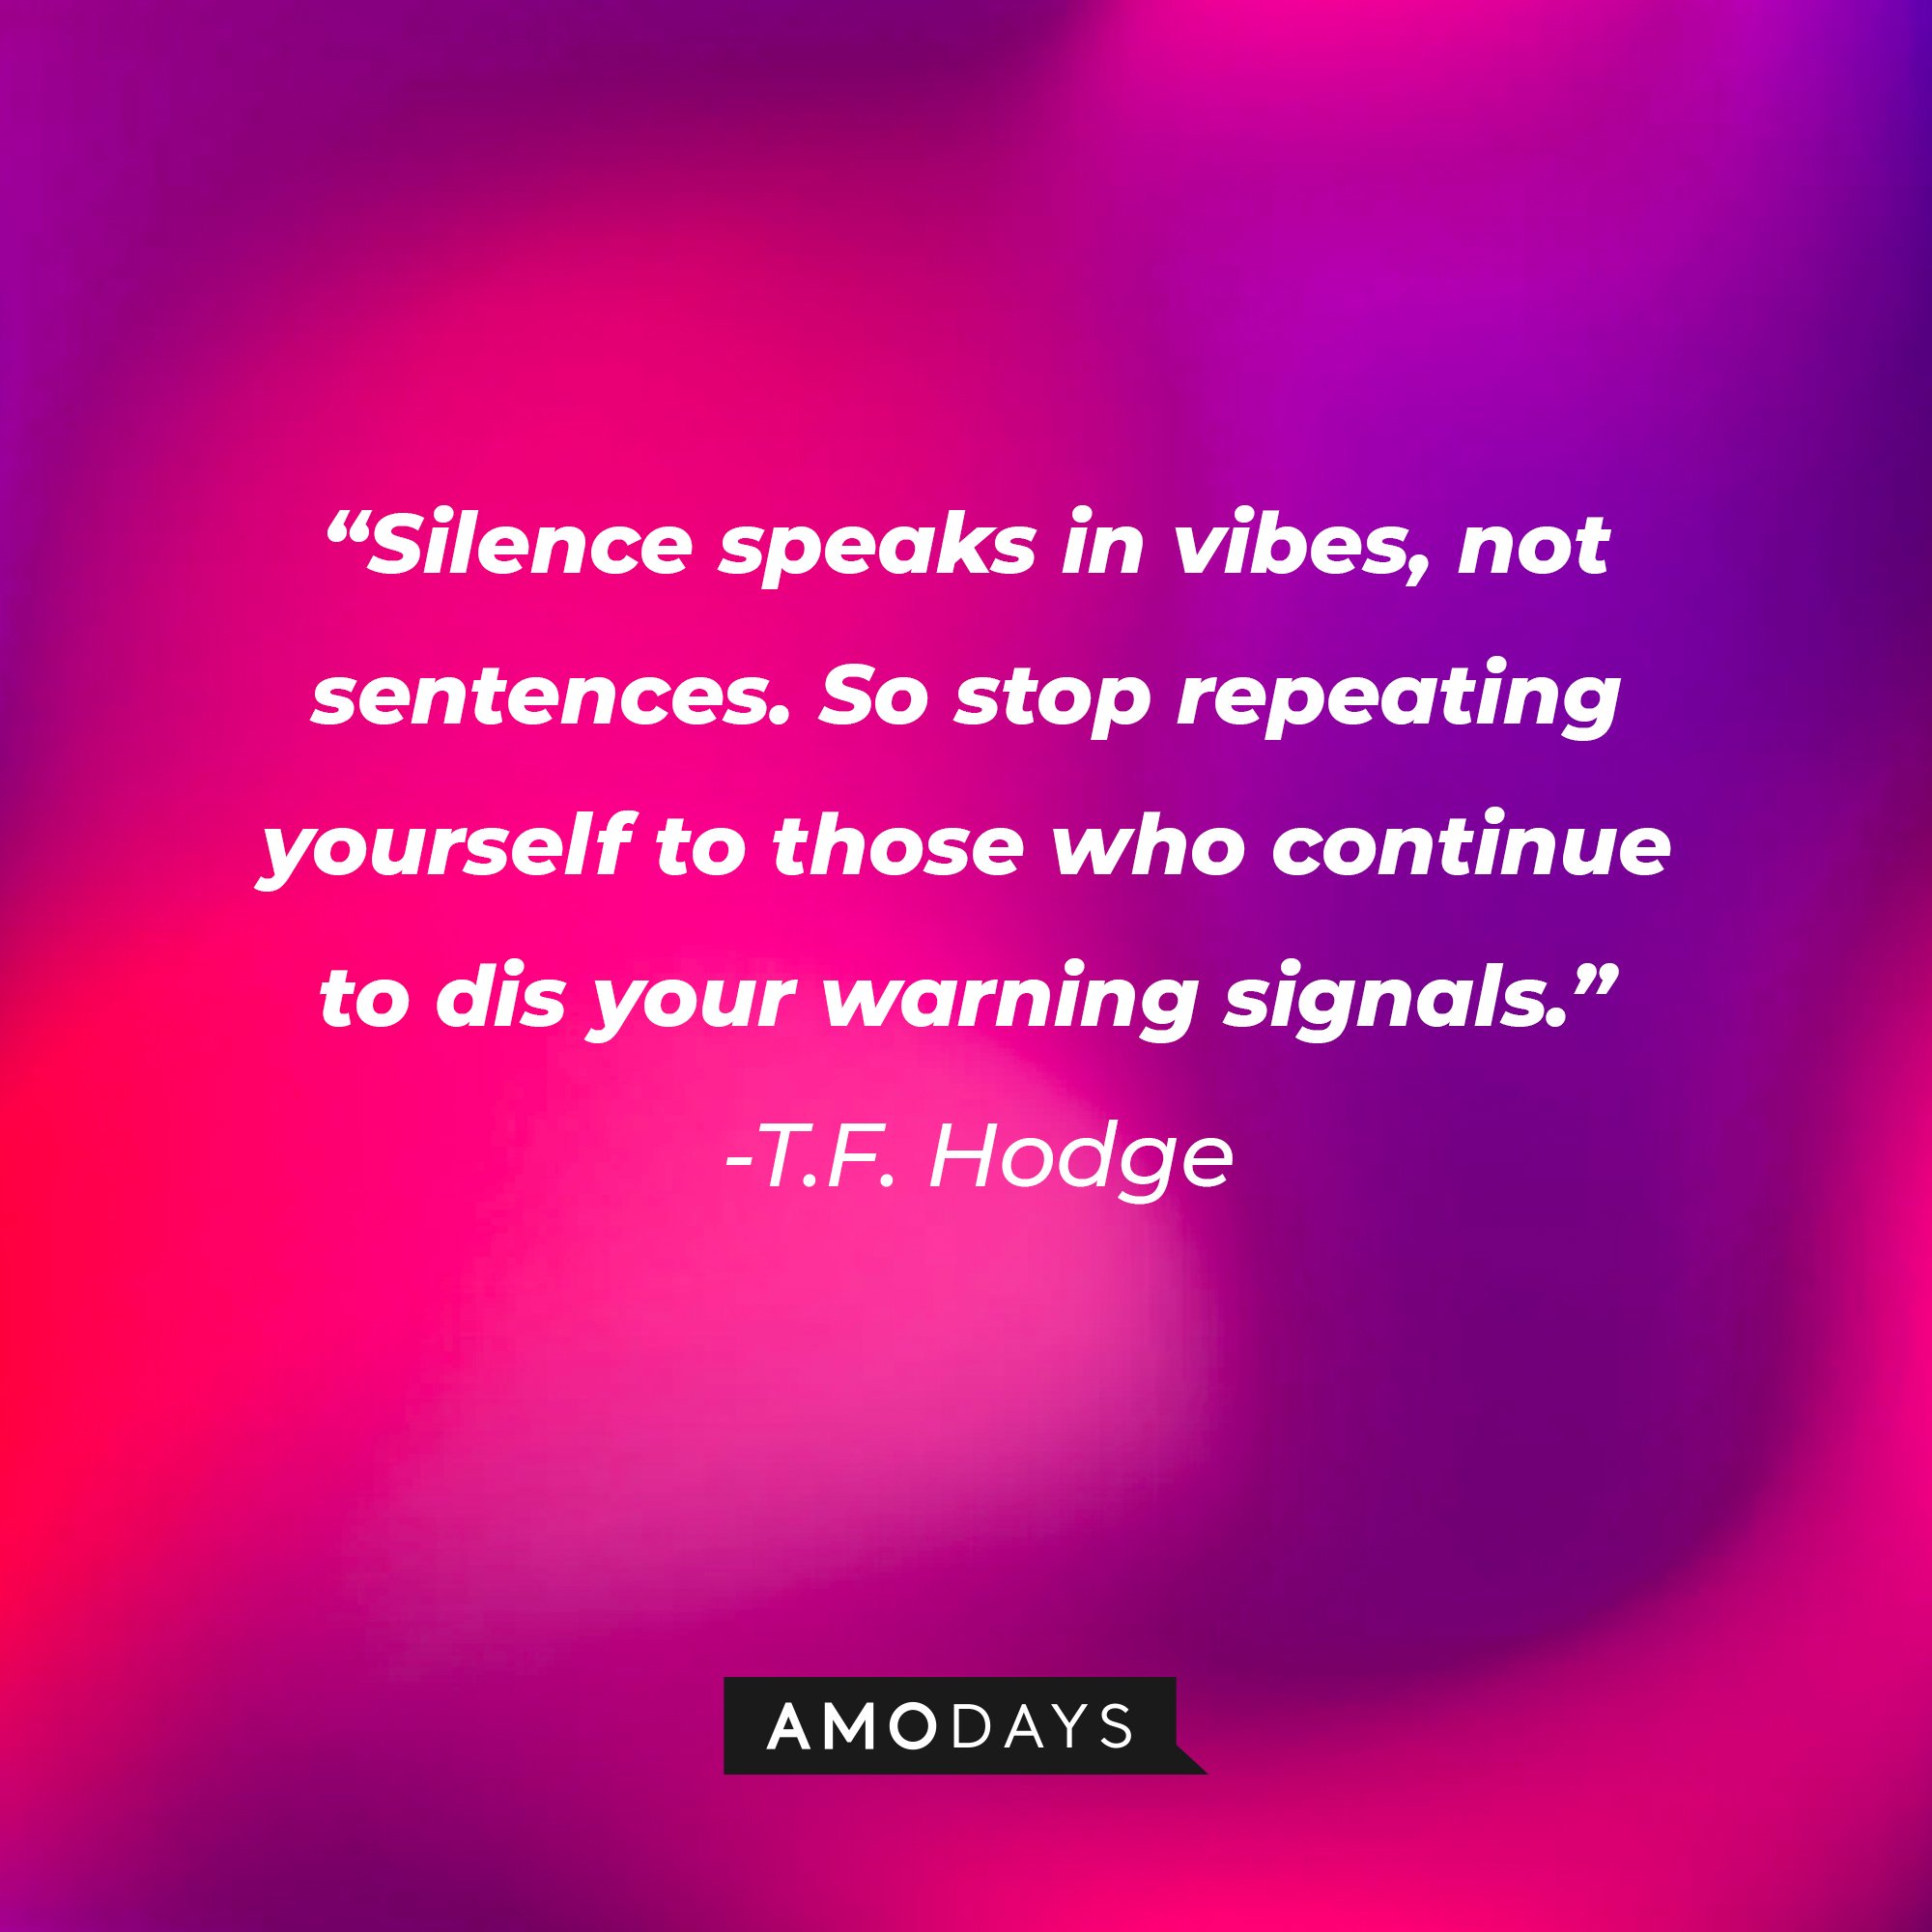 T.F. Hodge's quote:\\\\u00a0"Silence speaks in vibes, not sentences. So stop repeating yourself to those who continue to dis your warning signals."\\\\u00a0| Image: AmoDays